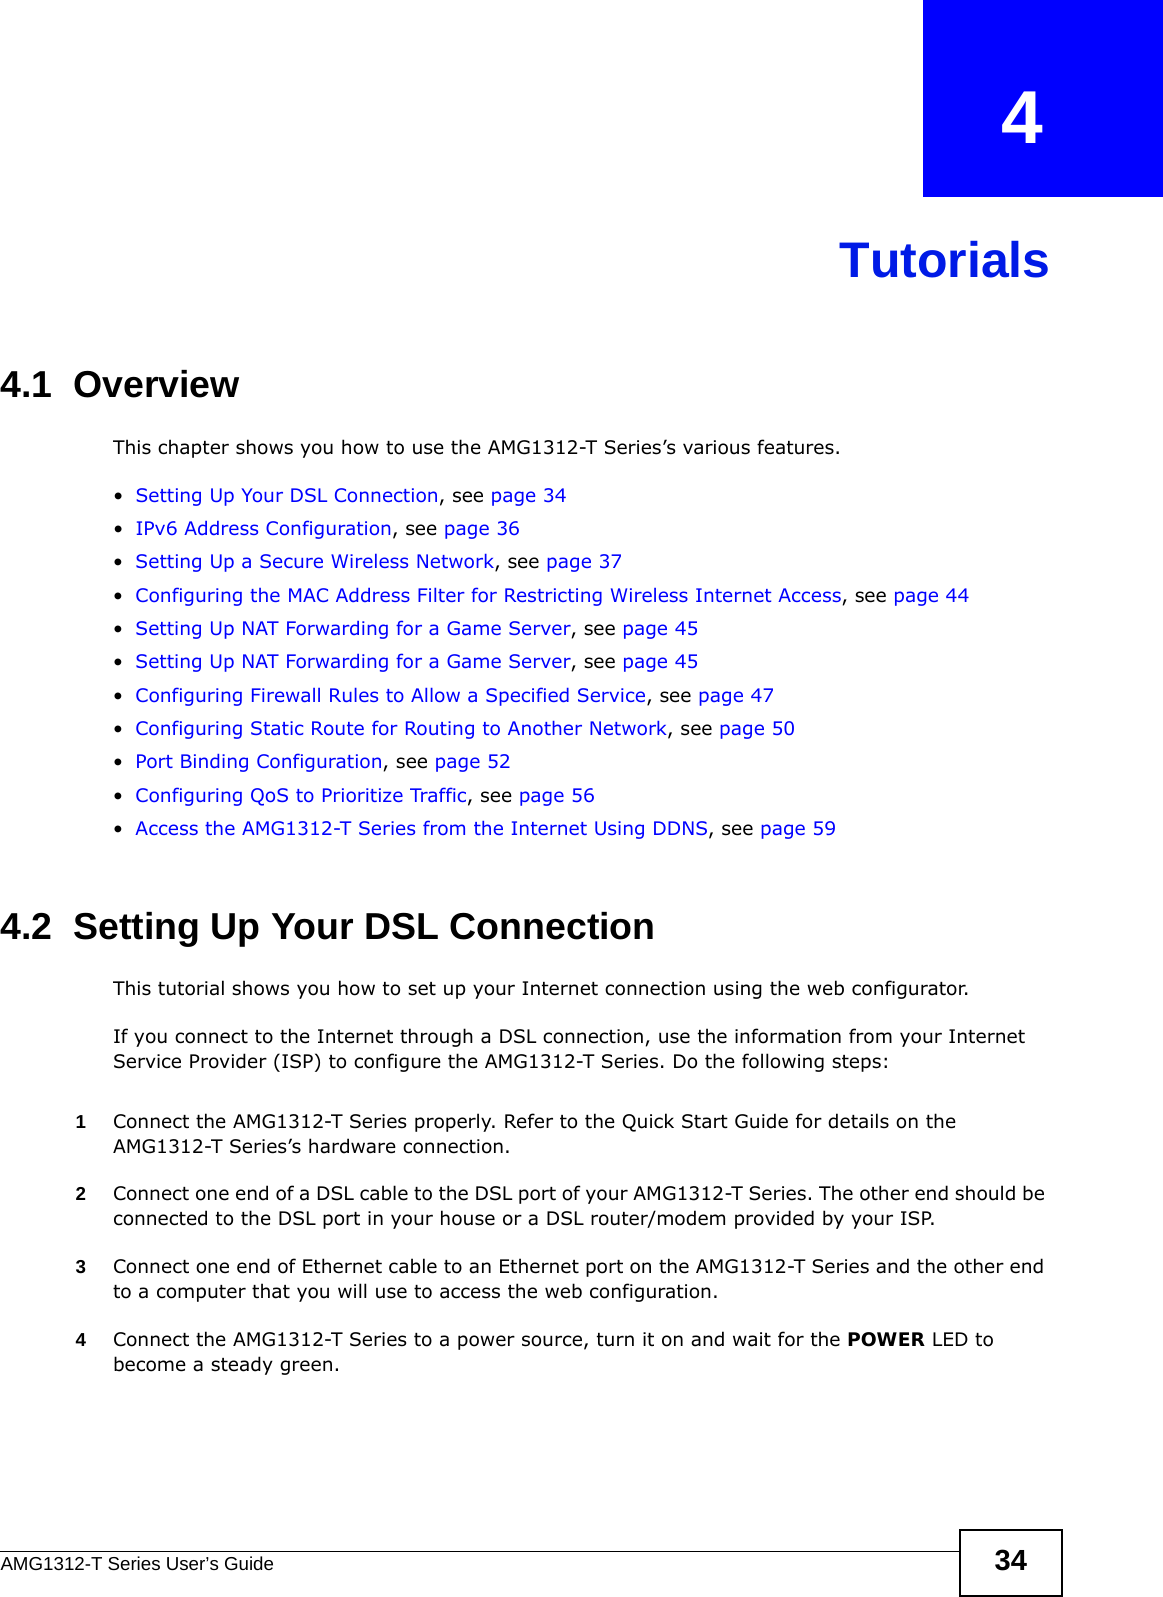 AMG1312-T Series User’s Guide 34CHAPTER   4Tutorials4.1  OverviewThis chapter shows you how to use the AMG1312-T Series’s various features.•Setting Up Your DSL Connection, see page 34•IPv6 Address Configuration, see page 36•Setting Up a Secure Wireless Network, see page 37•Configuring the MAC Address Filter for Restricting Wireless Internet Access, see page 44•Setting Up NAT Forwarding for a Game Server, see page 45•Setting Up NAT Forwarding for a Game Server, see page 45•Configuring Firewall Rules to Allow a Specified Service, see page 47•Configuring Static Route for Routing to Another Network, see page 50•Port Binding Configuration, see page 52•Configuring QoS to Prioritize Traffic, see page 56•Access the AMG1312-T Series from the Internet Using DDNS, see page 594.2  Setting Up Your DSL ConnectionThis tutorial shows you how to set up your Internet connection using the web configurator. If you connect to the Internet through a DSL connection, use the information from your Internet Service Provider (ISP) to configure the AMG1312-T Series. Do the following steps:1Connect the AMG1312-T Series properly. Refer to the Quick Start Guide for details on the AMG1312-T Series’s hardware connection. 2Connect one end of a DSL cable to the DSL port of your AMG1312-T Series. The other end should be connected to the DSL port in your house or a DSL router/modem provided by your ISP.3Connect one end of Ethernet cable to an Ethernet port on the AMG1312-T Series and the other end to a computer that you will use to access the web configuration.4Connect the AMG1312-T Series to a power source, turn it on and wait for the POWER LED to become a steady green.